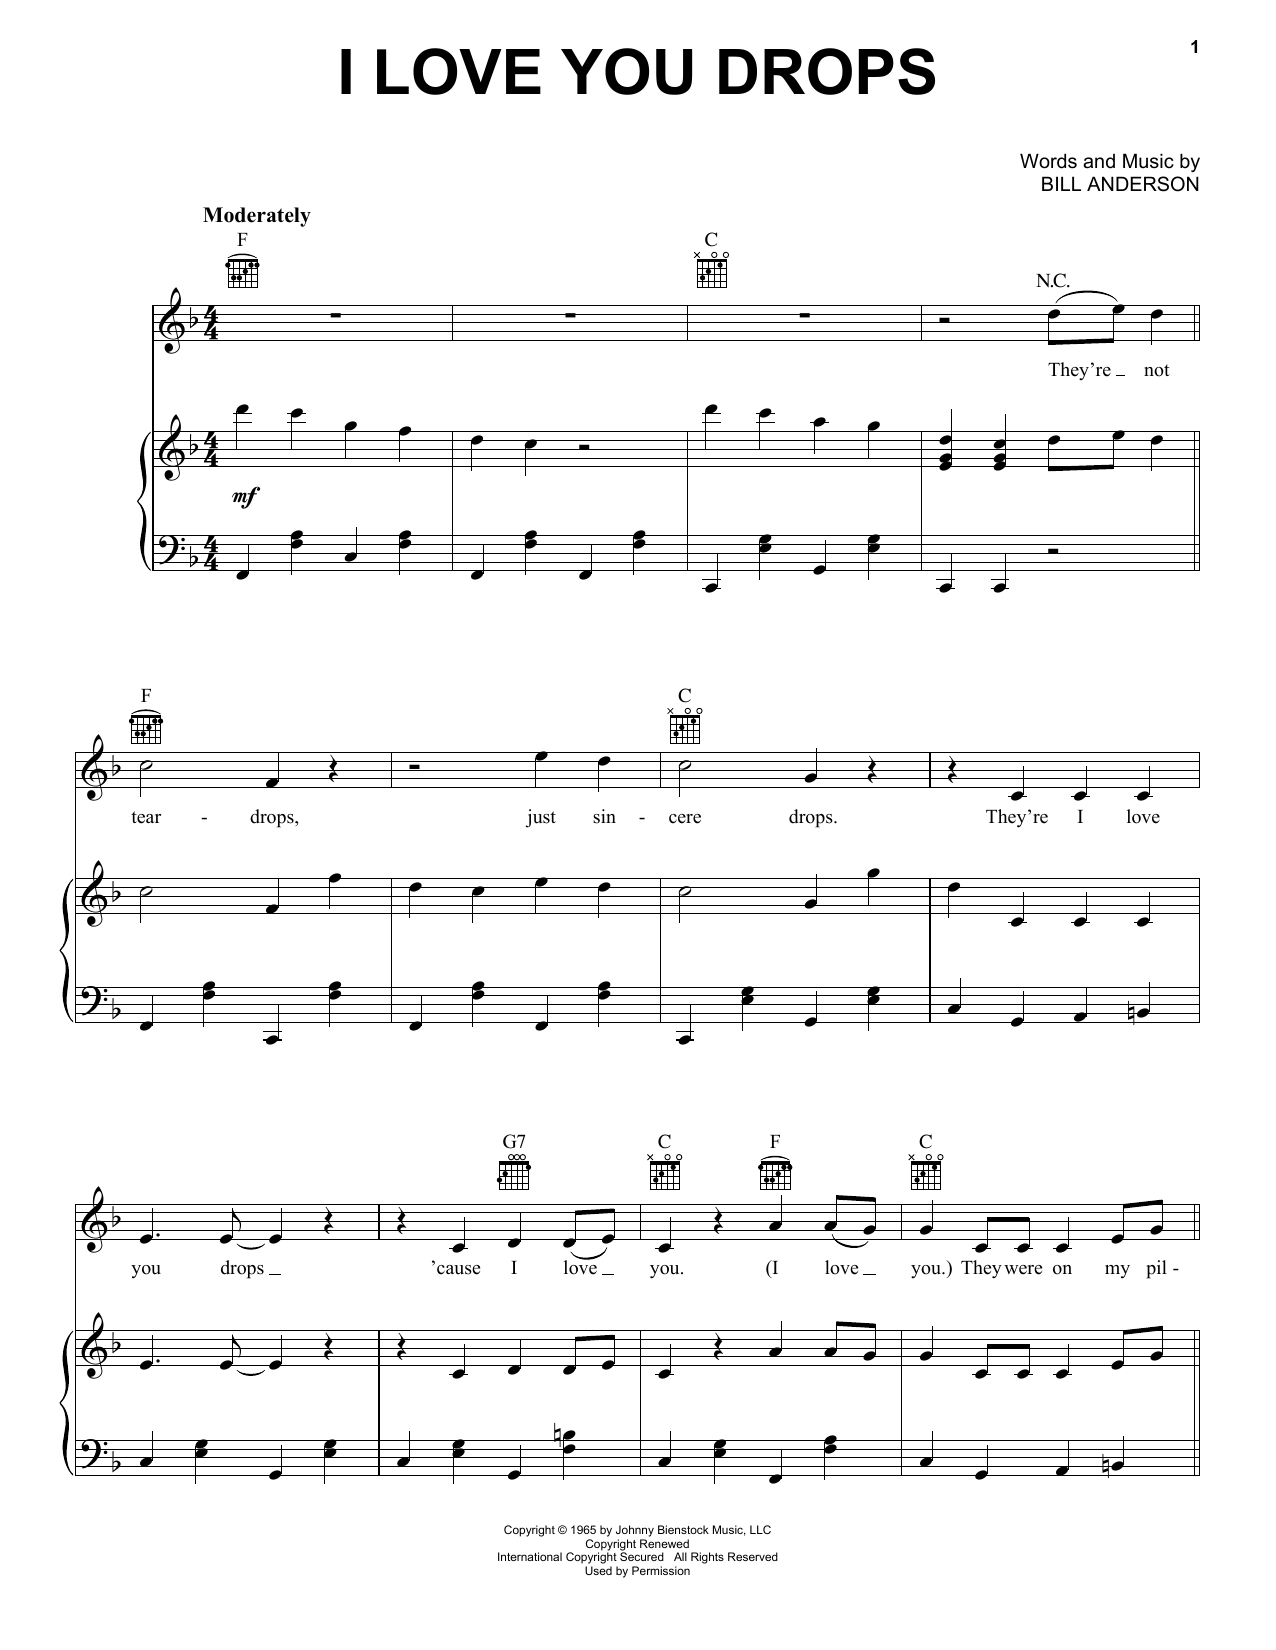 Download Bill Anderson I Love You Drops Sheet Music